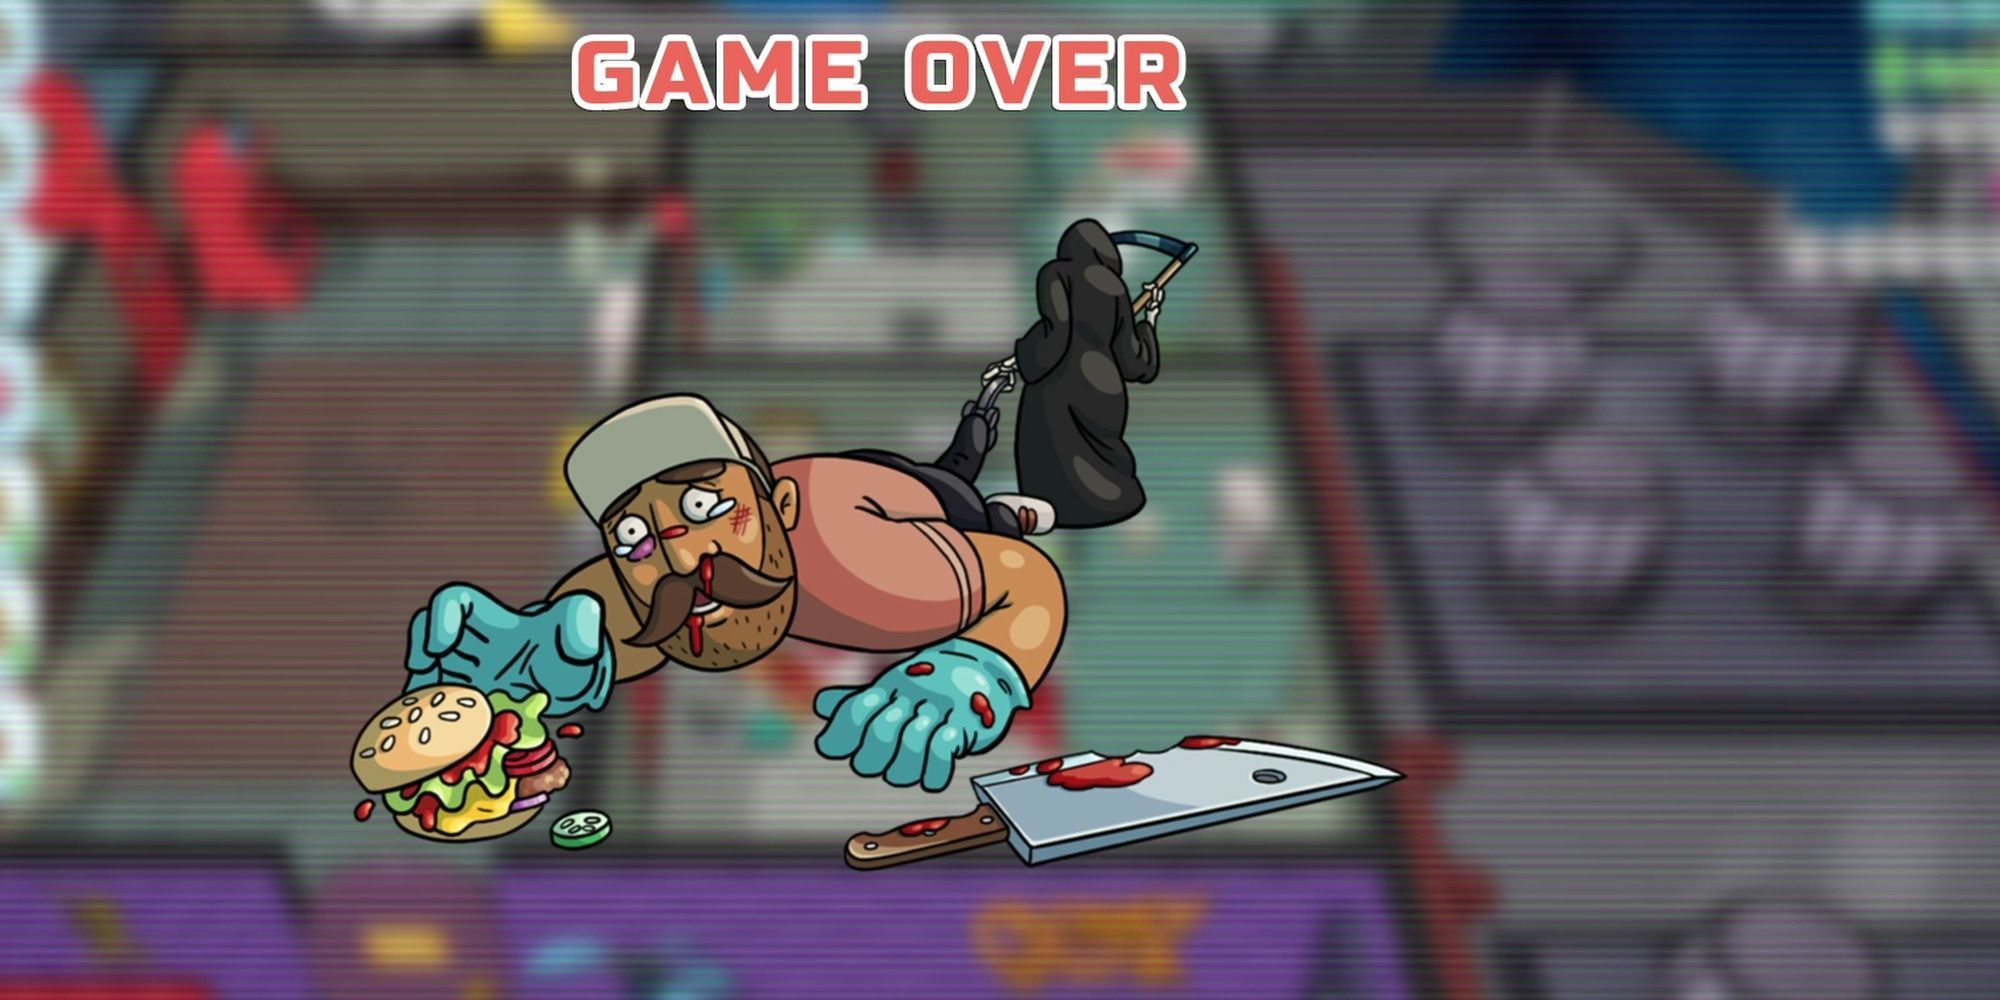 Godlike Burger: The Grim Reaper Pulling Away The Chef In The Game Over Screen